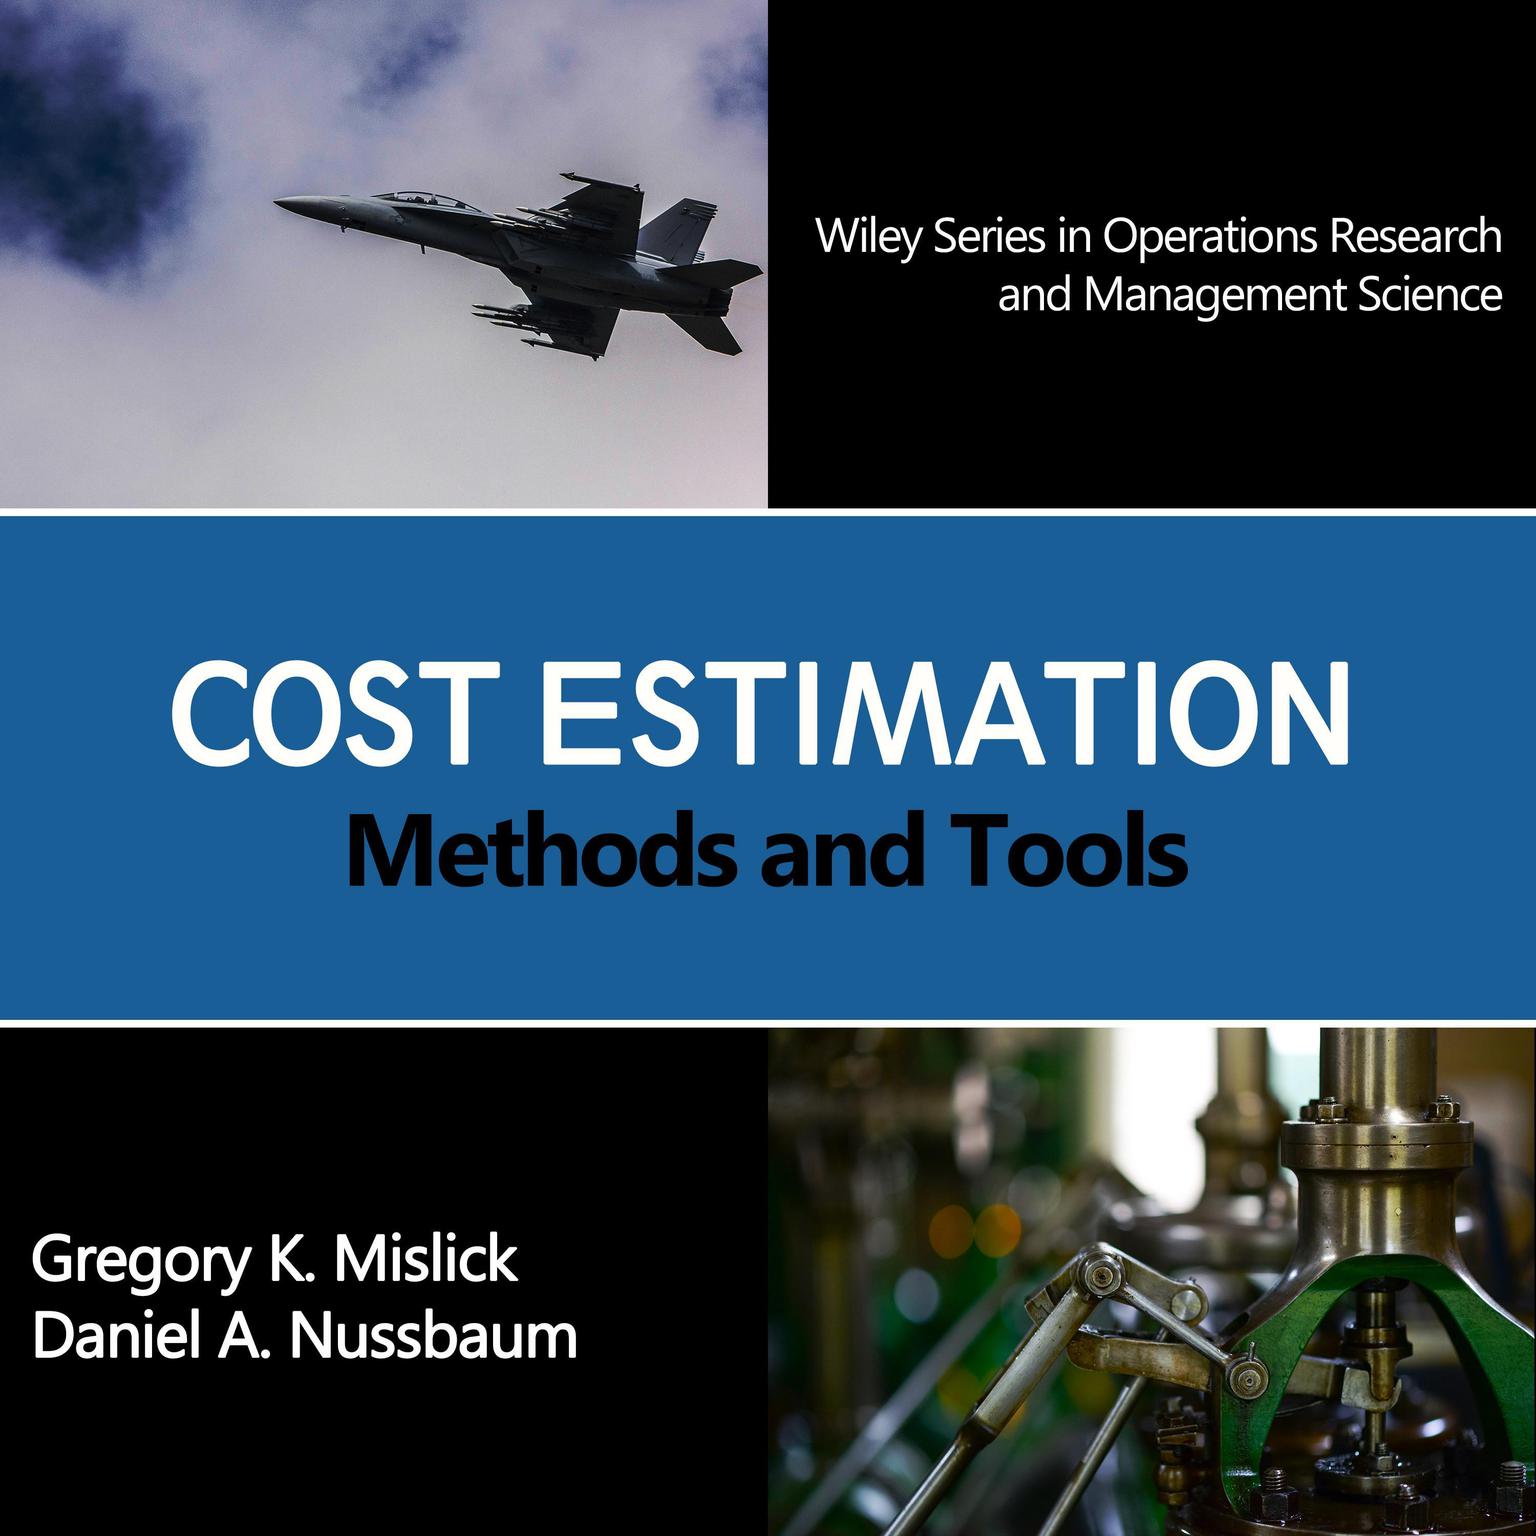 Cost Estimation: Methods and Tools (Wiley Series in Operations Research and Management Science) Audiobook, by Gregory K. Mislick